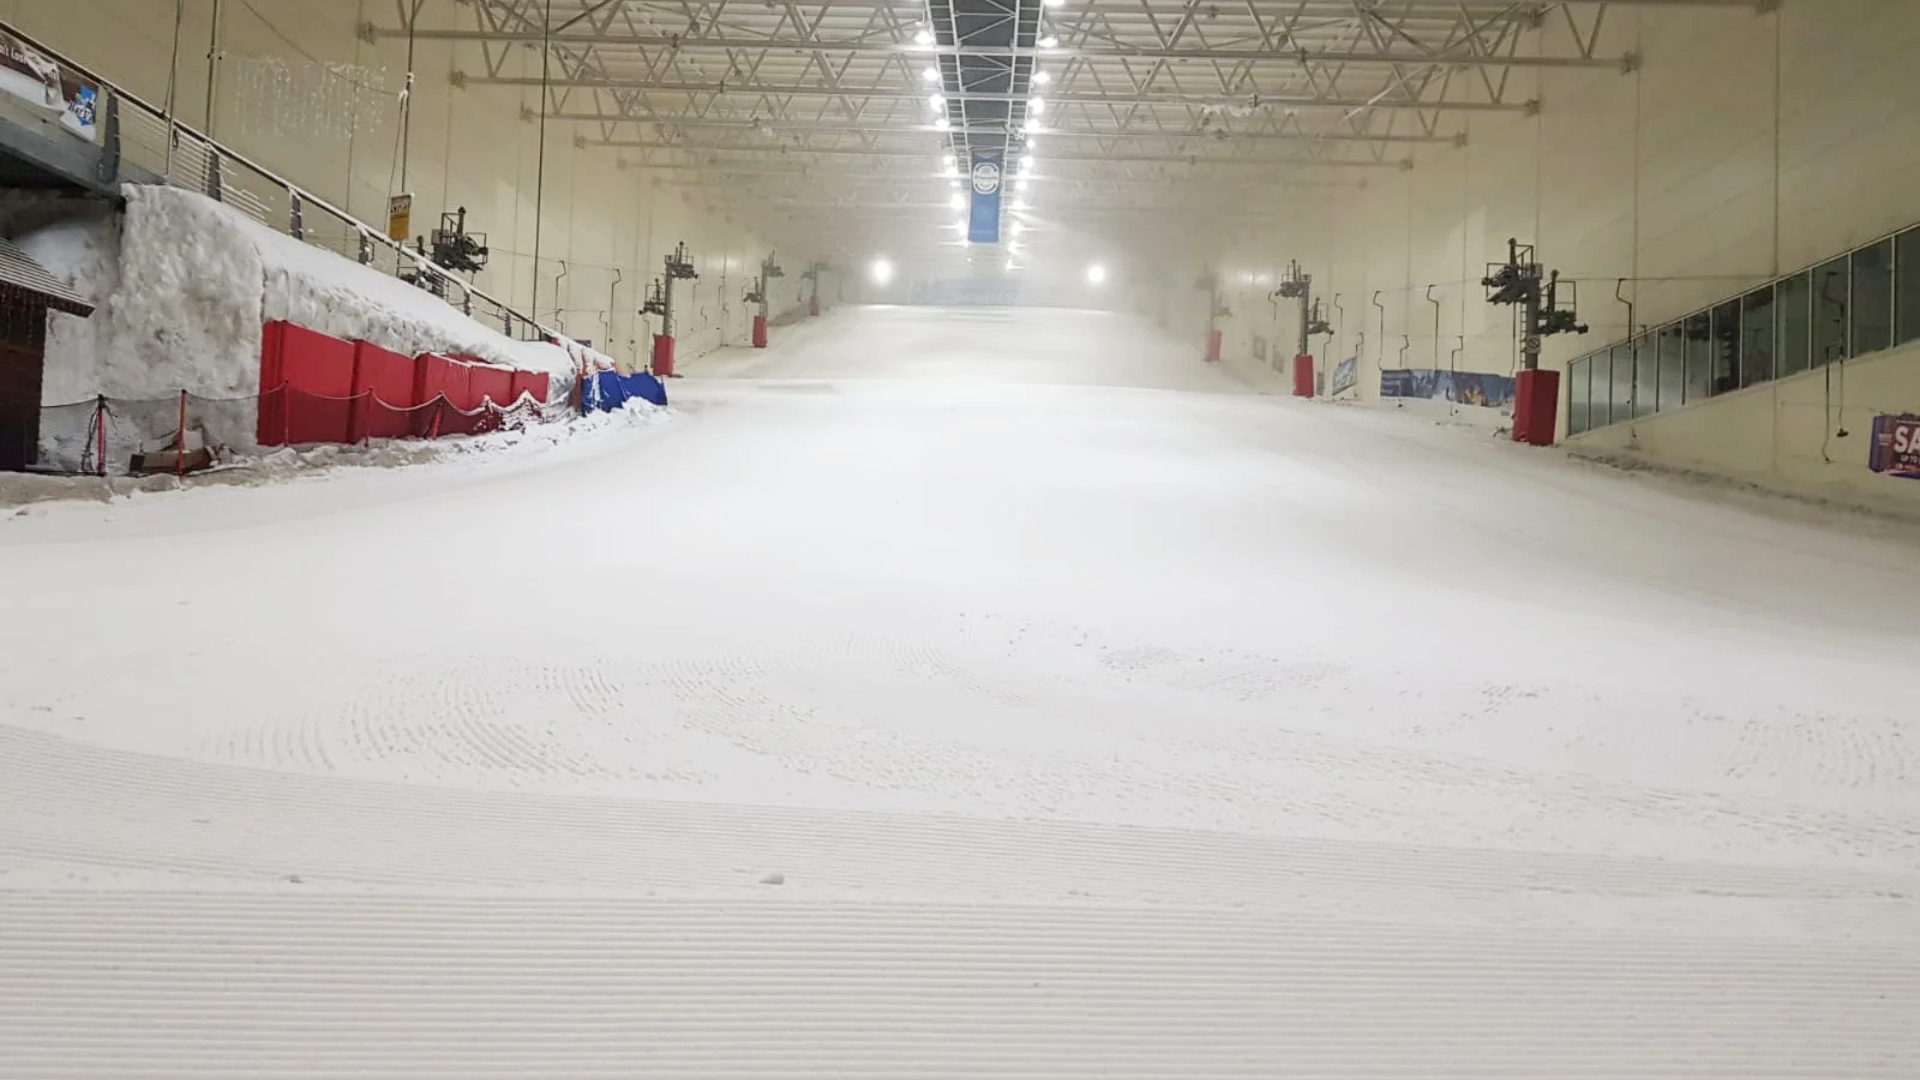 Snow Factor claimed to be home to the longest indoor slope in the UK.